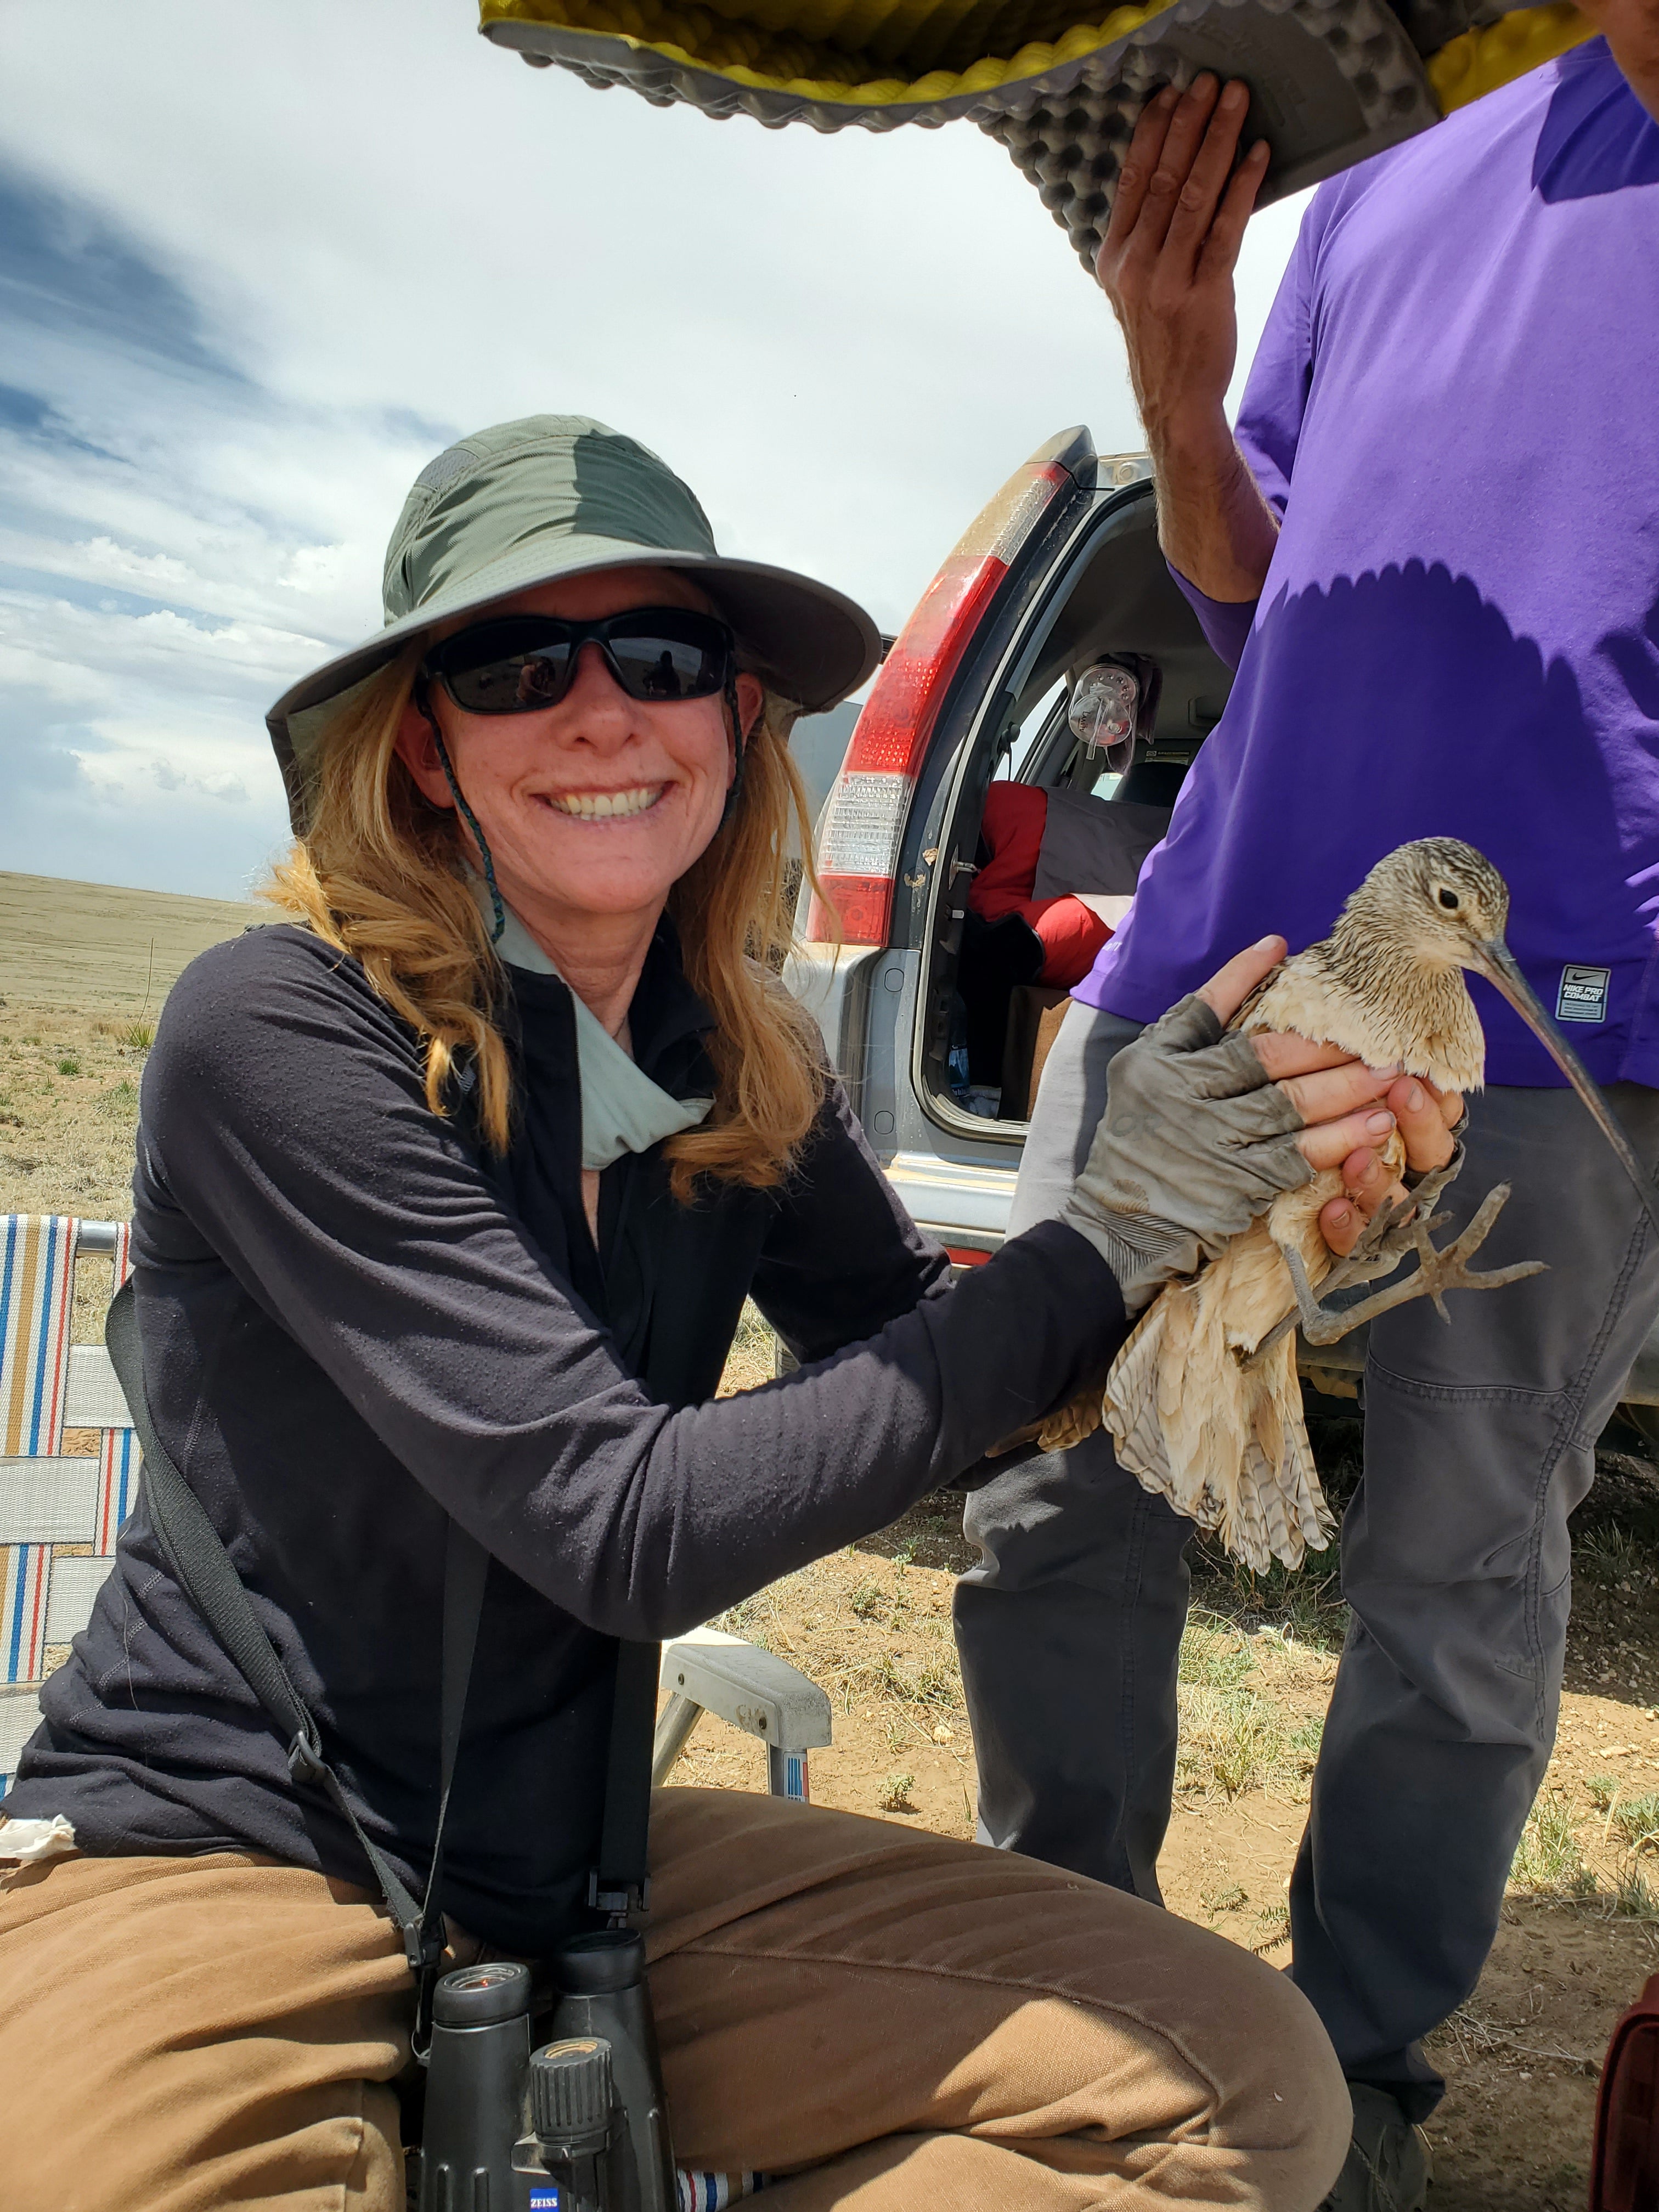 The image shows Kelli sitting on a folding camp chair with a Long-billed Curlew in her hands. A person holds a camping mat above her to provide shade.